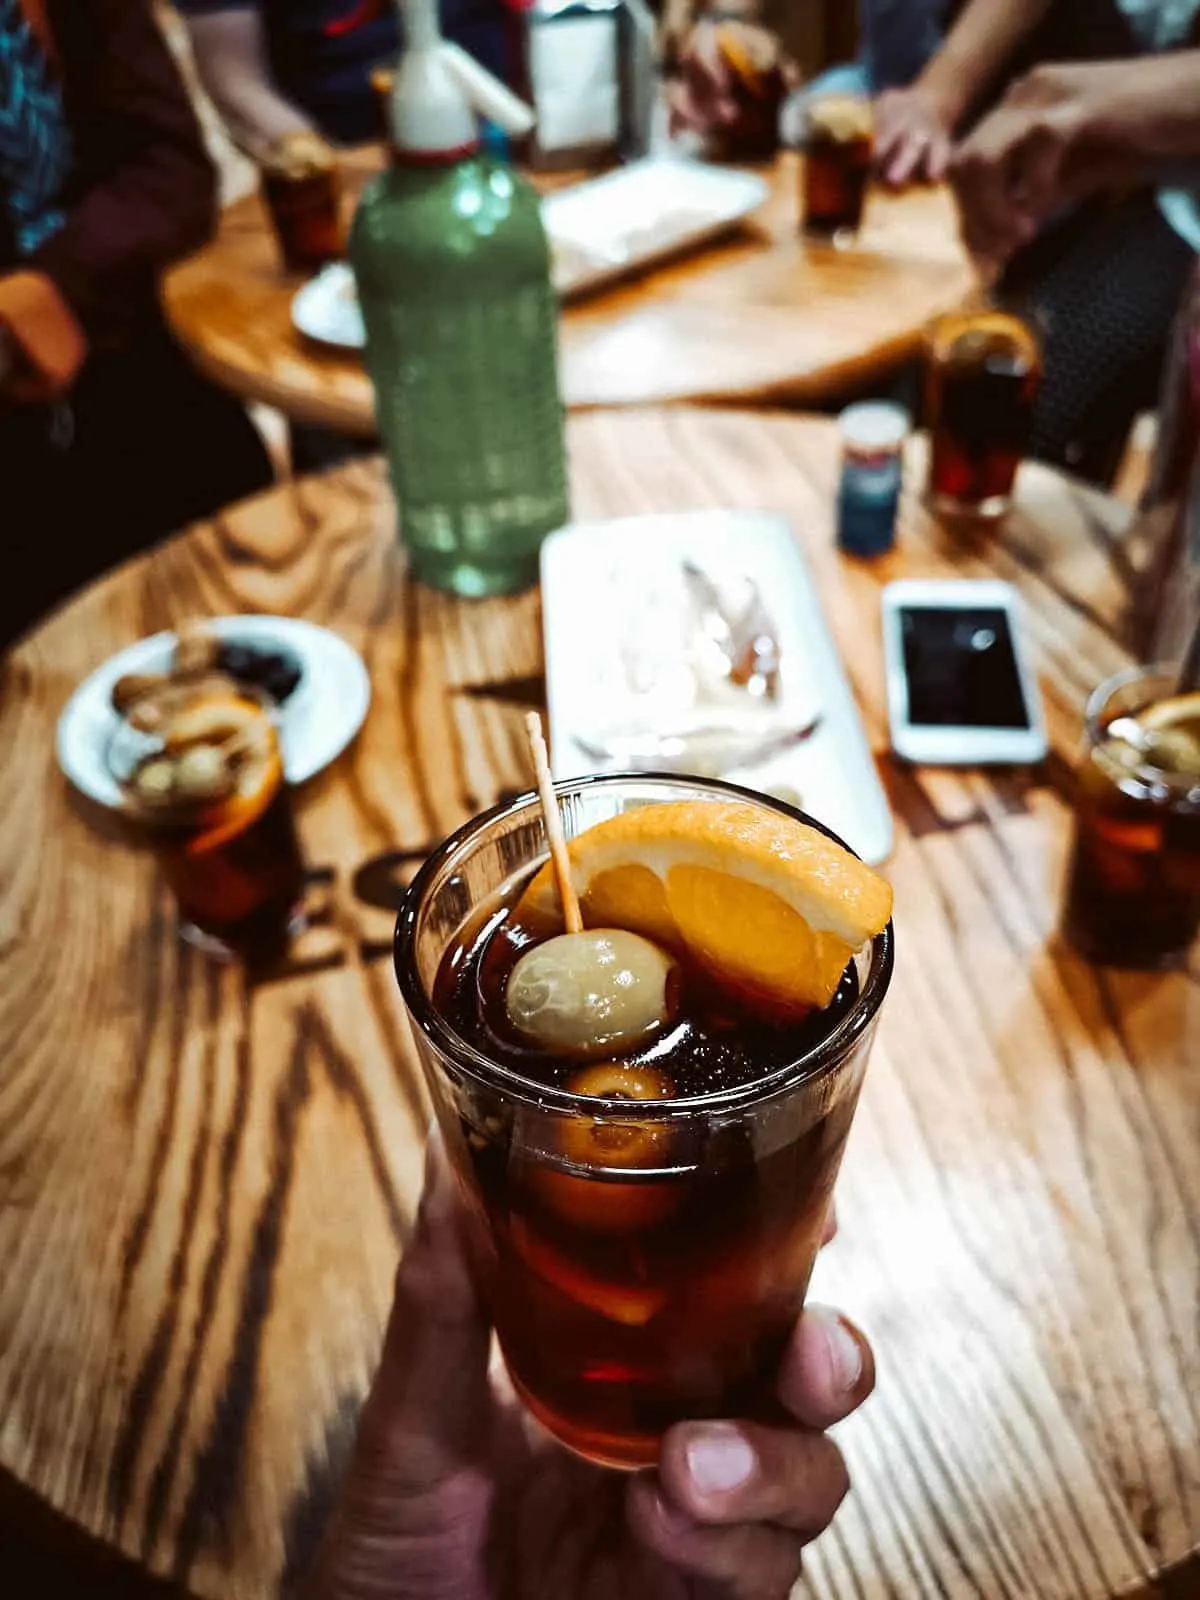 Vermut, a hugely popular Spanish alcoholic drink